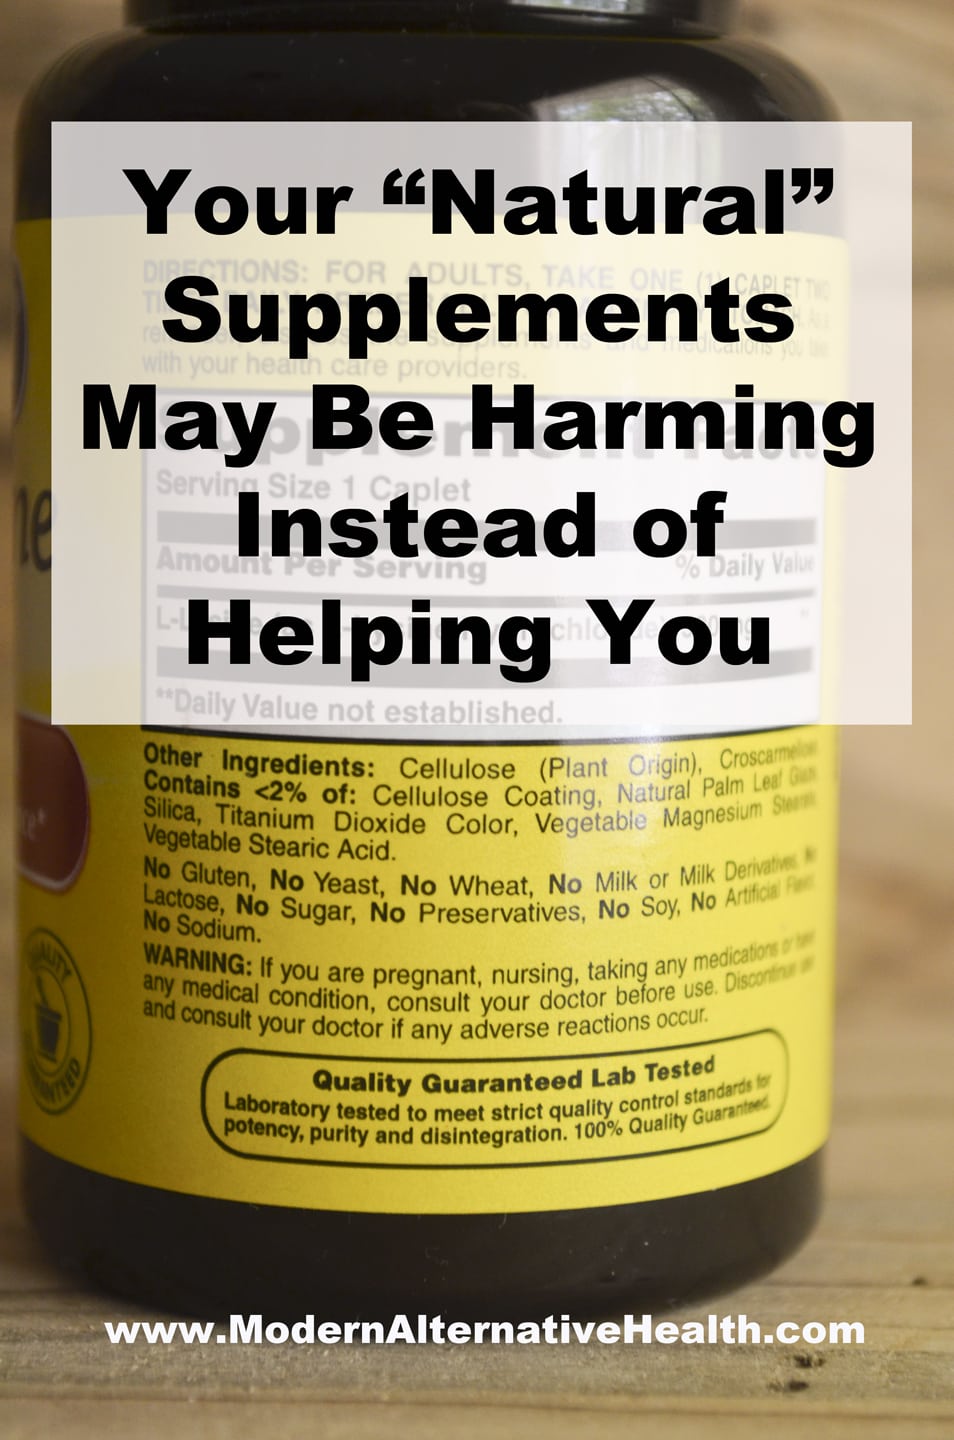 Your "Natural" Supplements May Be Harming Instead of Helping You